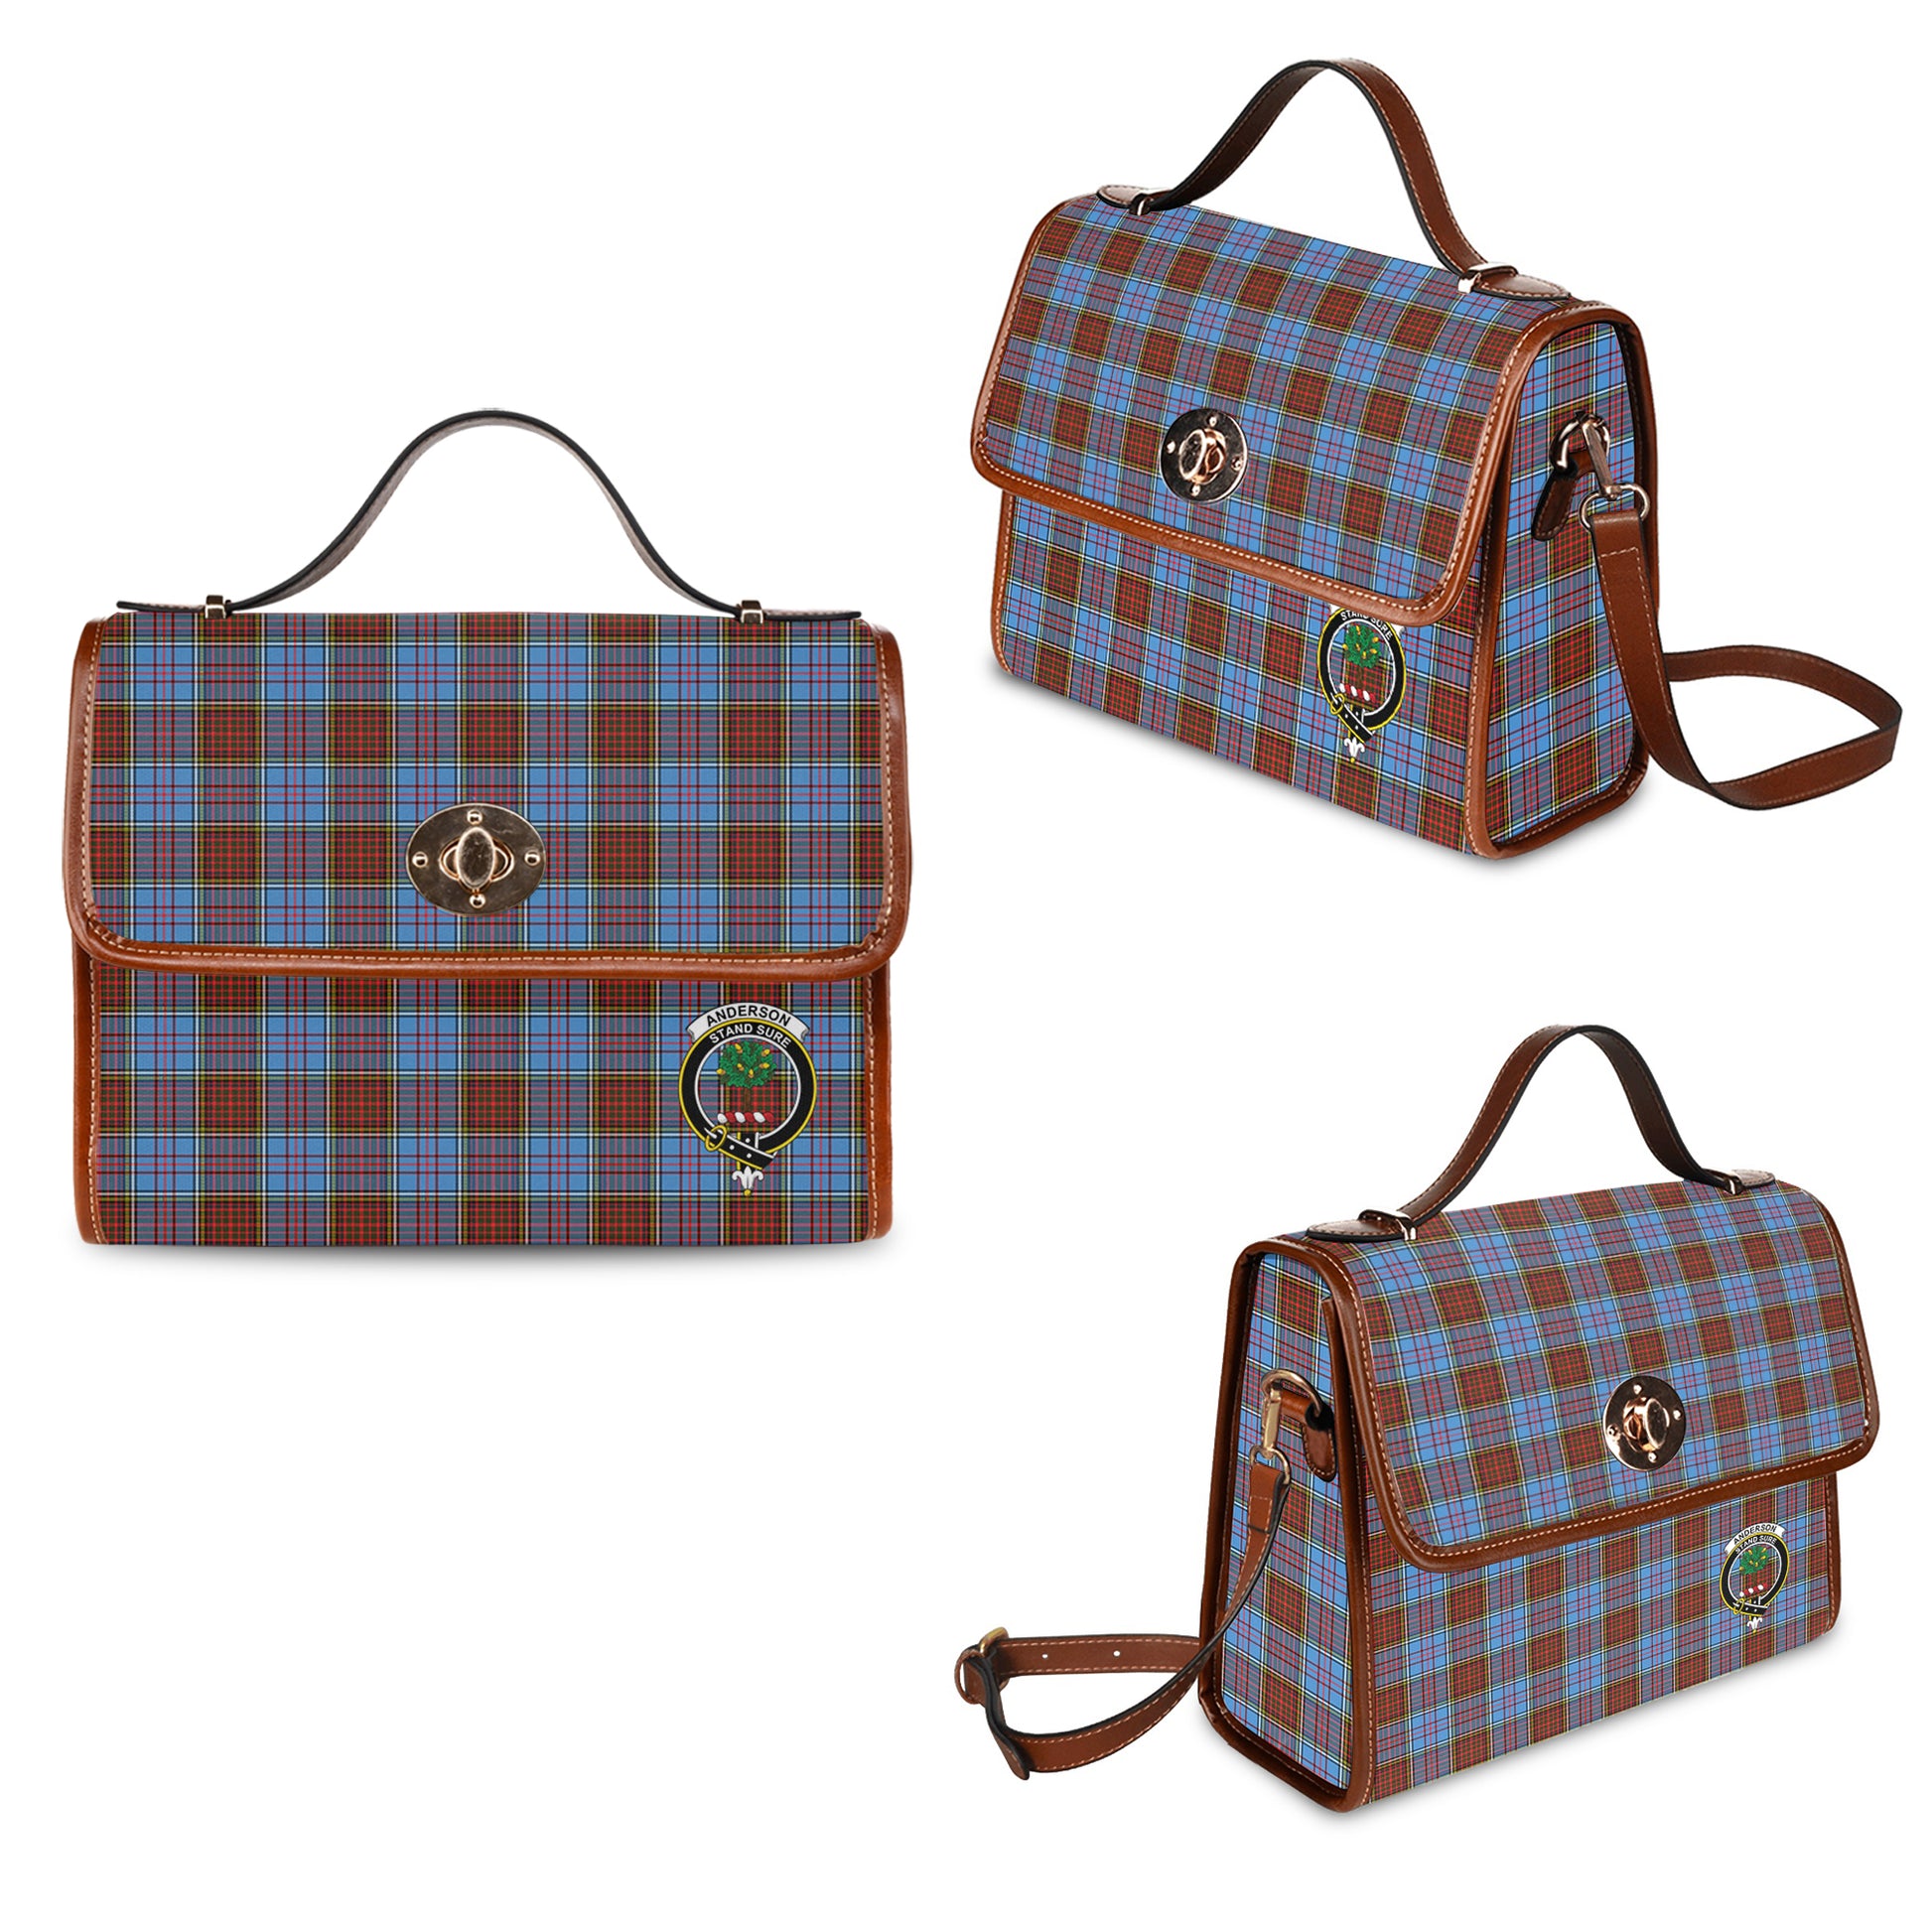 Anderson Modern Tartan Leather Strap Waterproof Canvas Bag with Family Crest One Size 34cm * 42cm (13.4" x 16.5") - Tartanvibesclothing